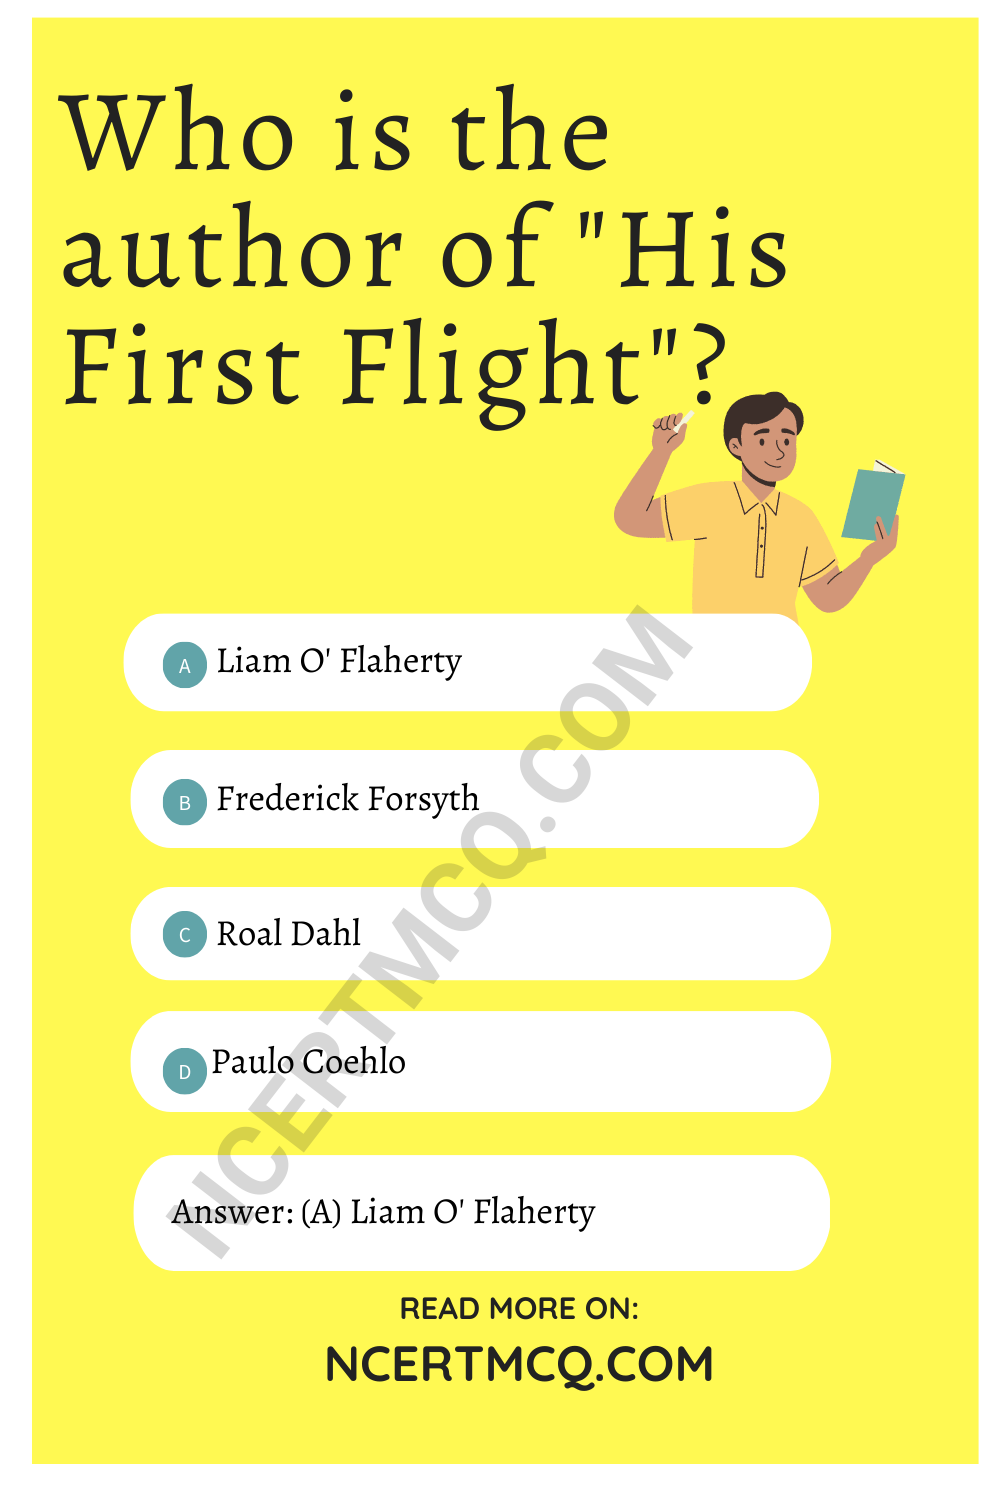 Who is the author of "His First Flight"?